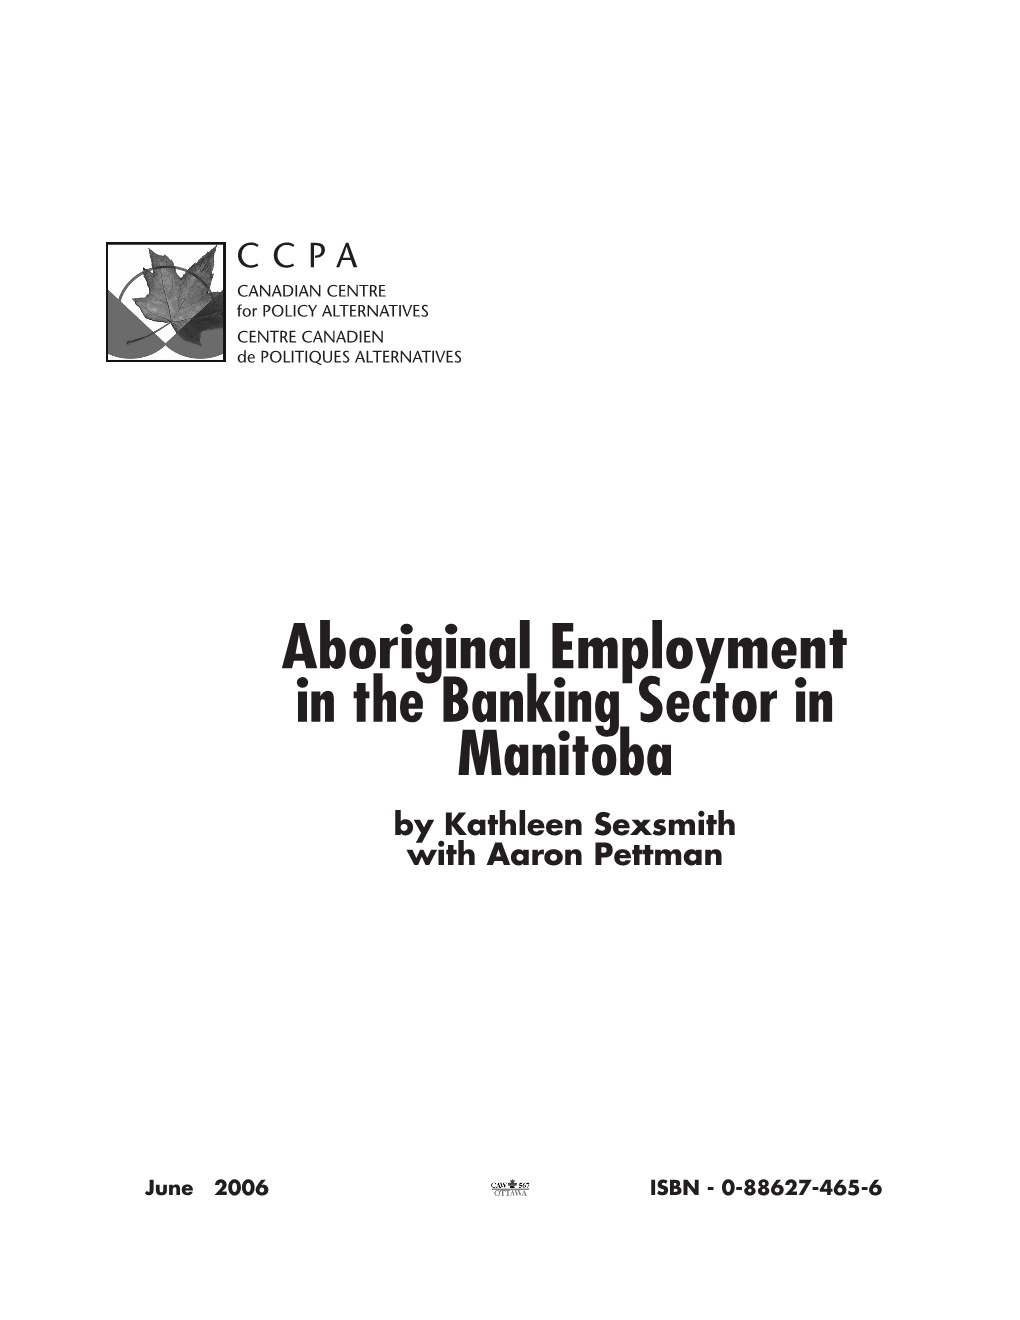 Aboriginal Employment in the Banking Sector in Manitoba by Kathleen Sexsmith with Aaron Pettman